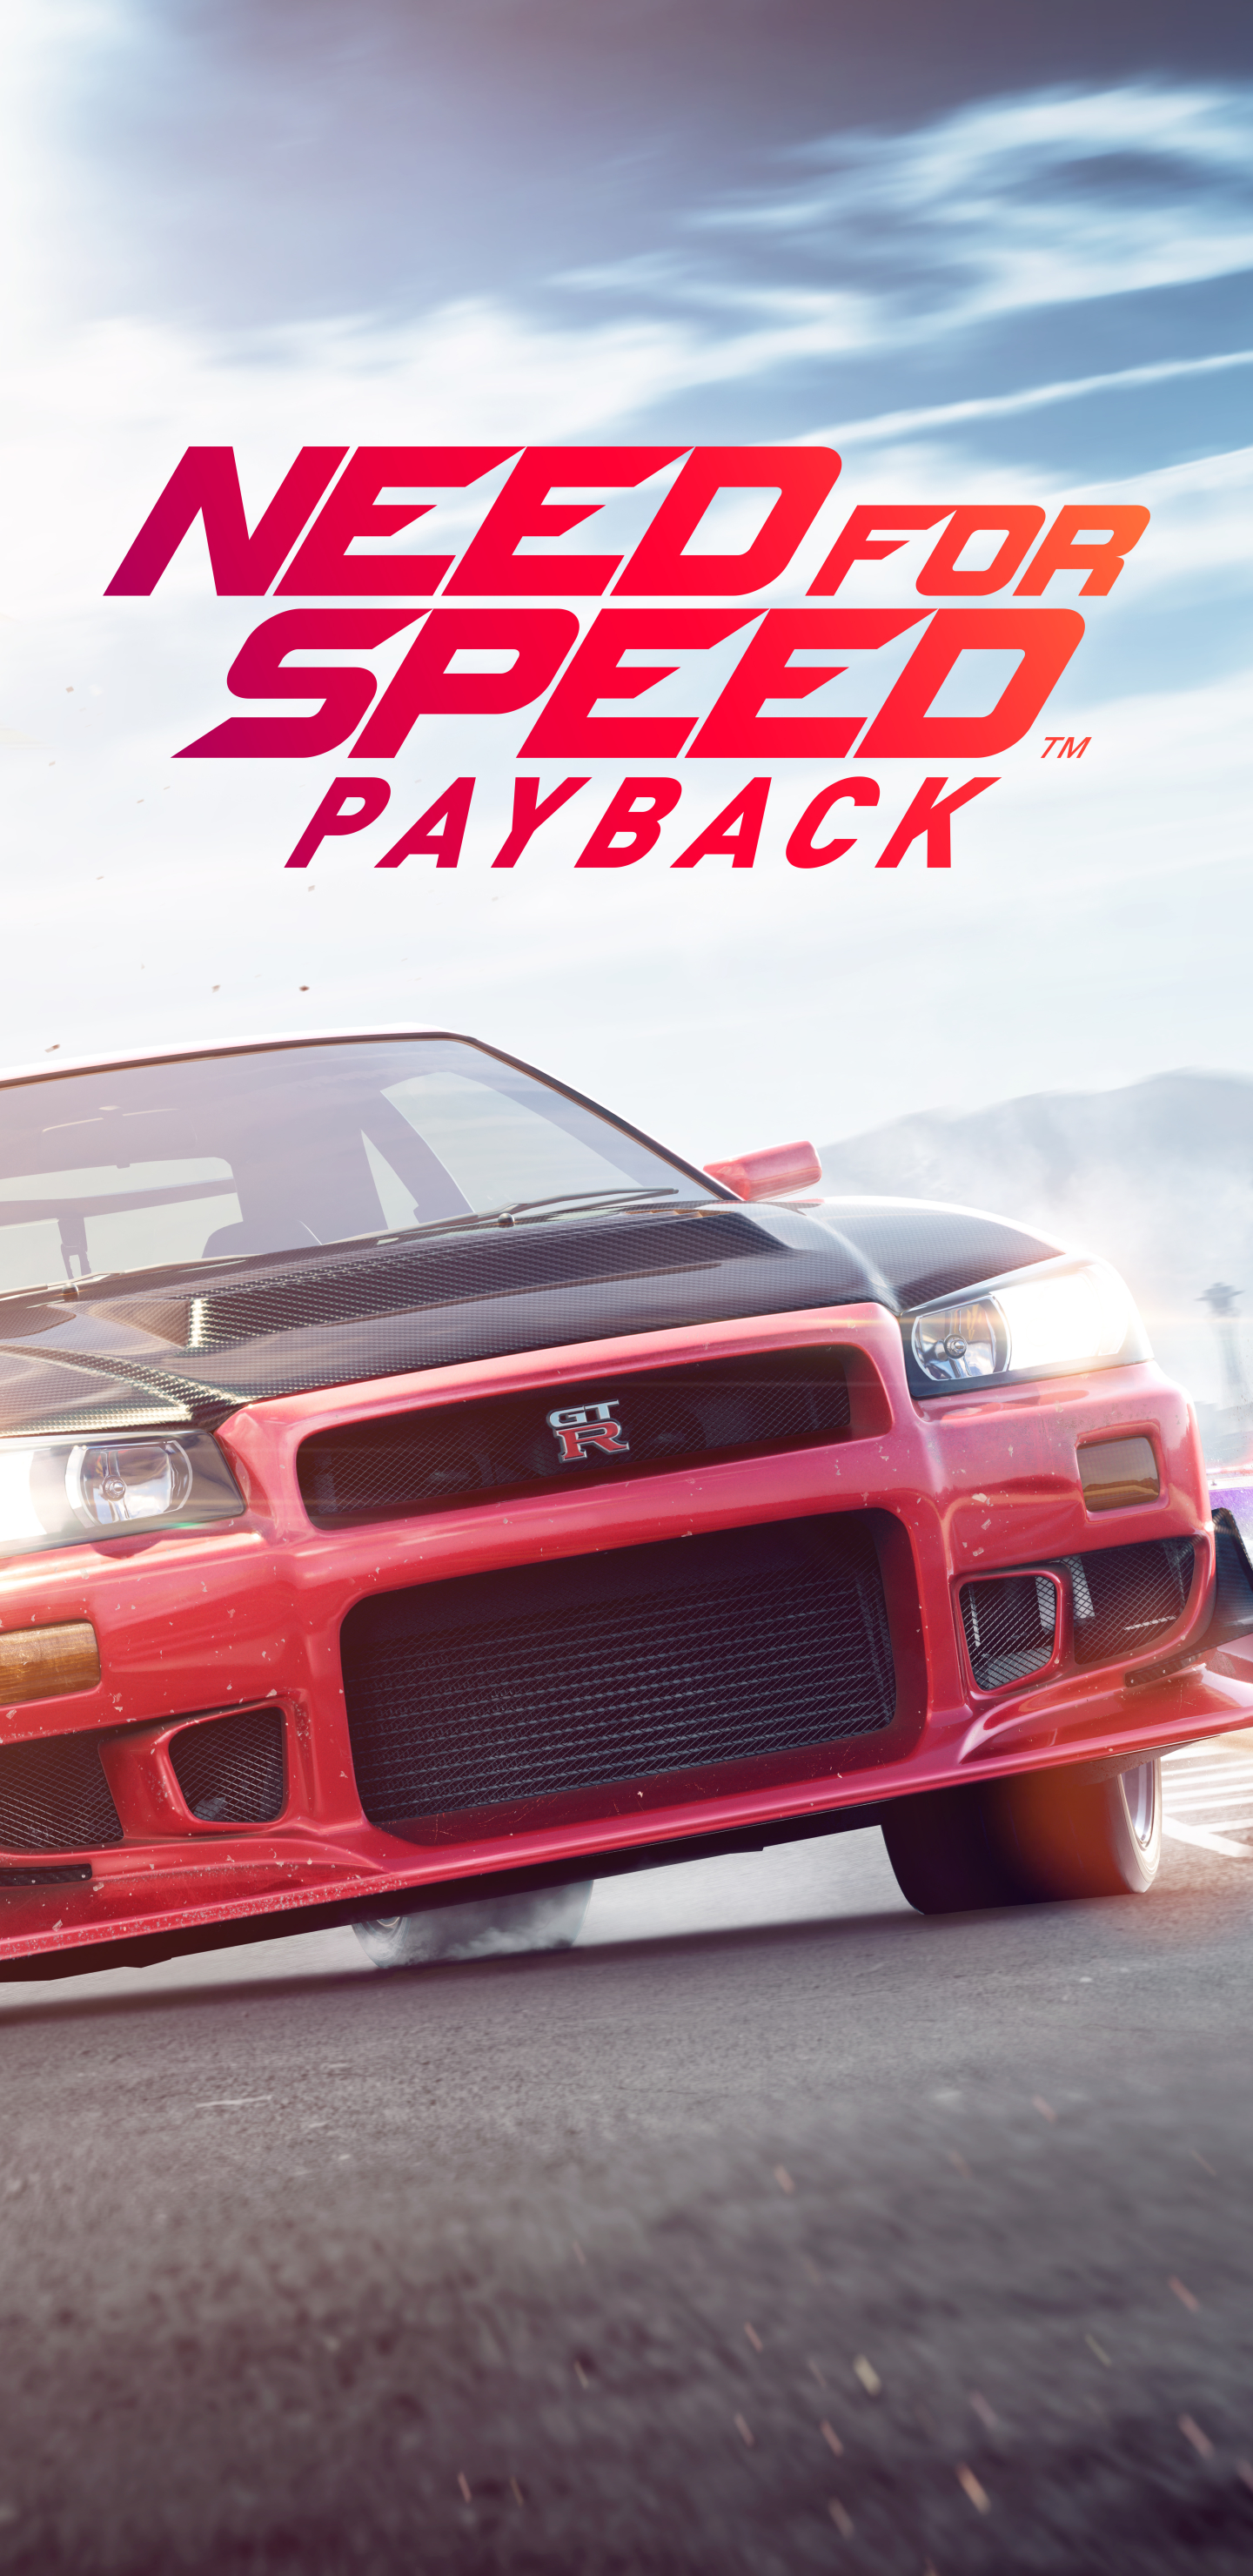 Need for Speed Payback Phone Wallpaper